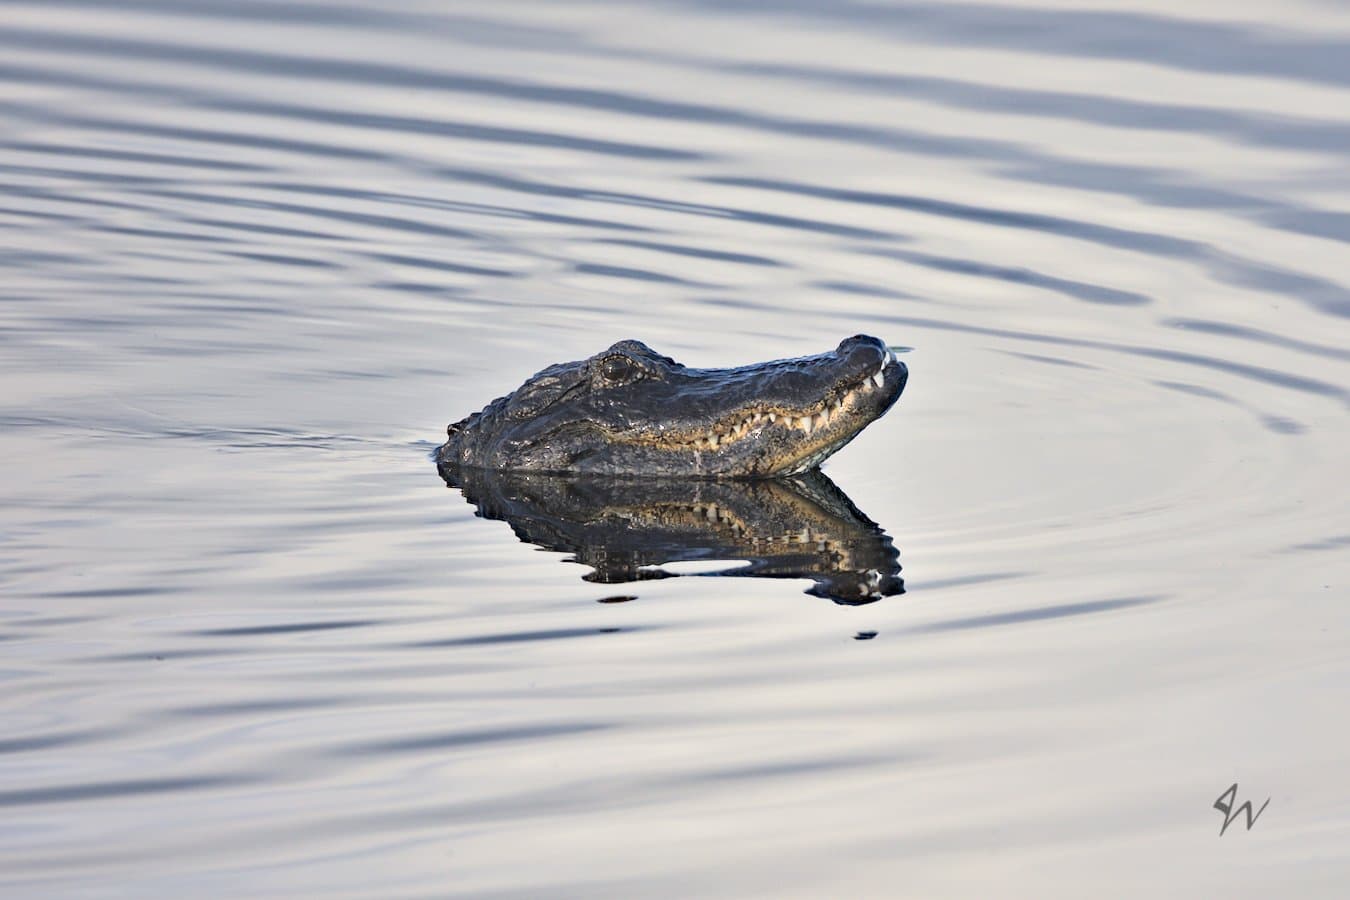 Gator head lifting out of water in center of smooth wake.